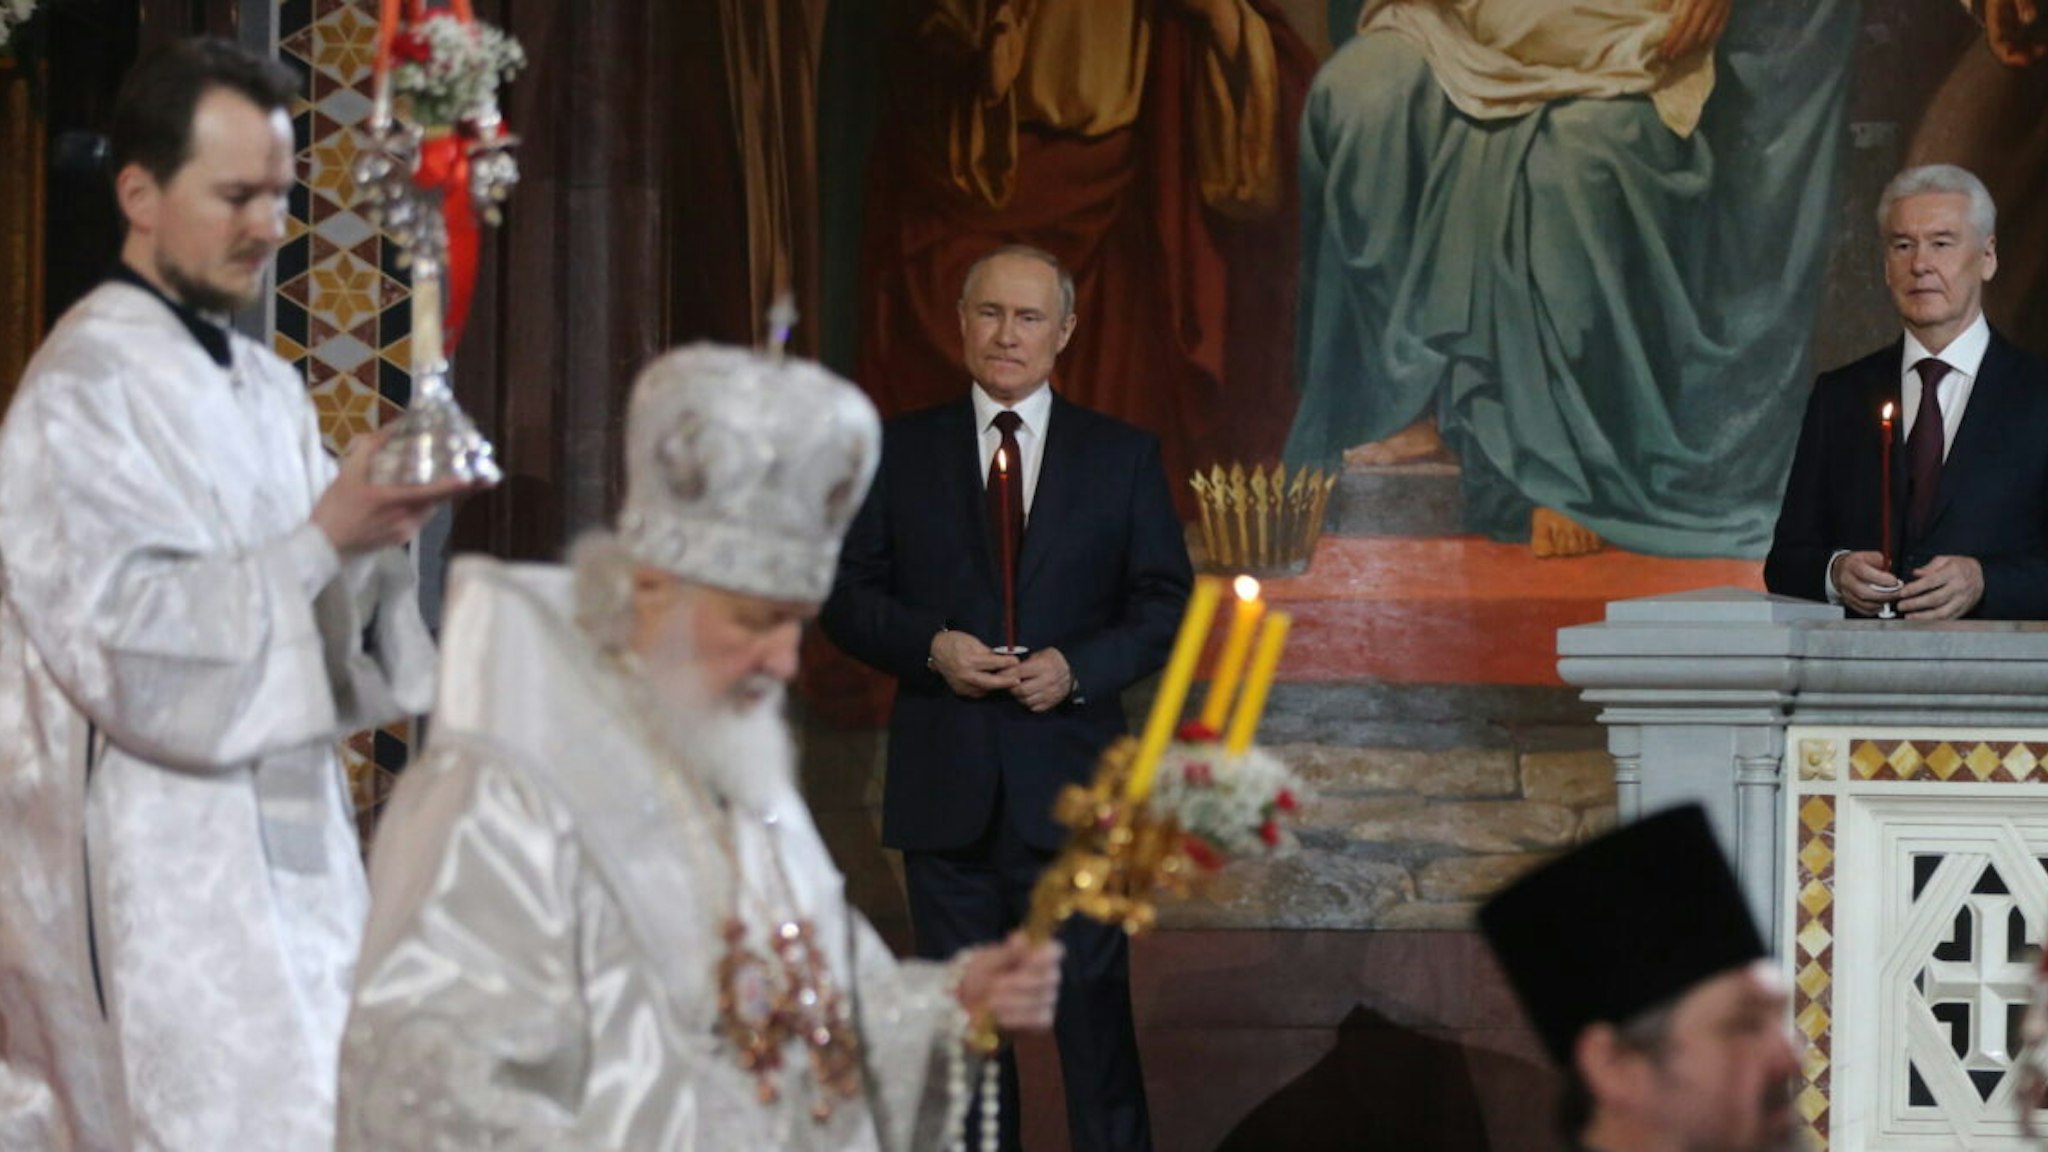 Russian President Vladimir Putin (C) and Moscow's Mayor Sergei Sobyanin (R) attend Orthodox Easter mass led by Russian Orthodox Patriarch Kirill at the Christ The Saviour Cathedral on April 24, 2022 in Moscow, Russia